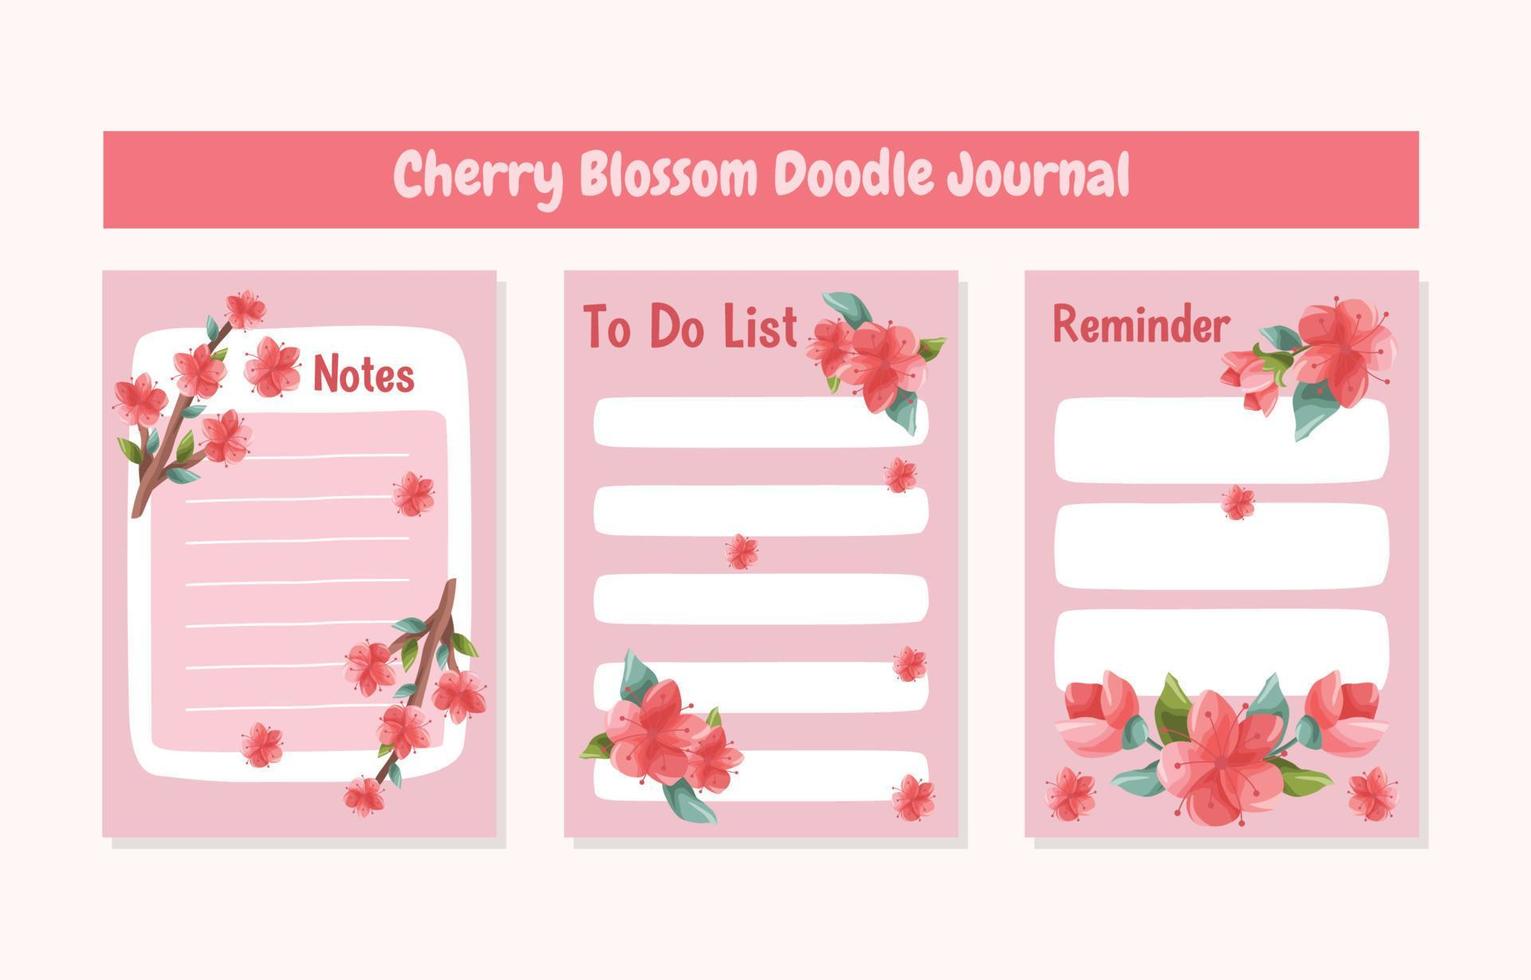 Cherry Blossom Doodle Journal Template vector